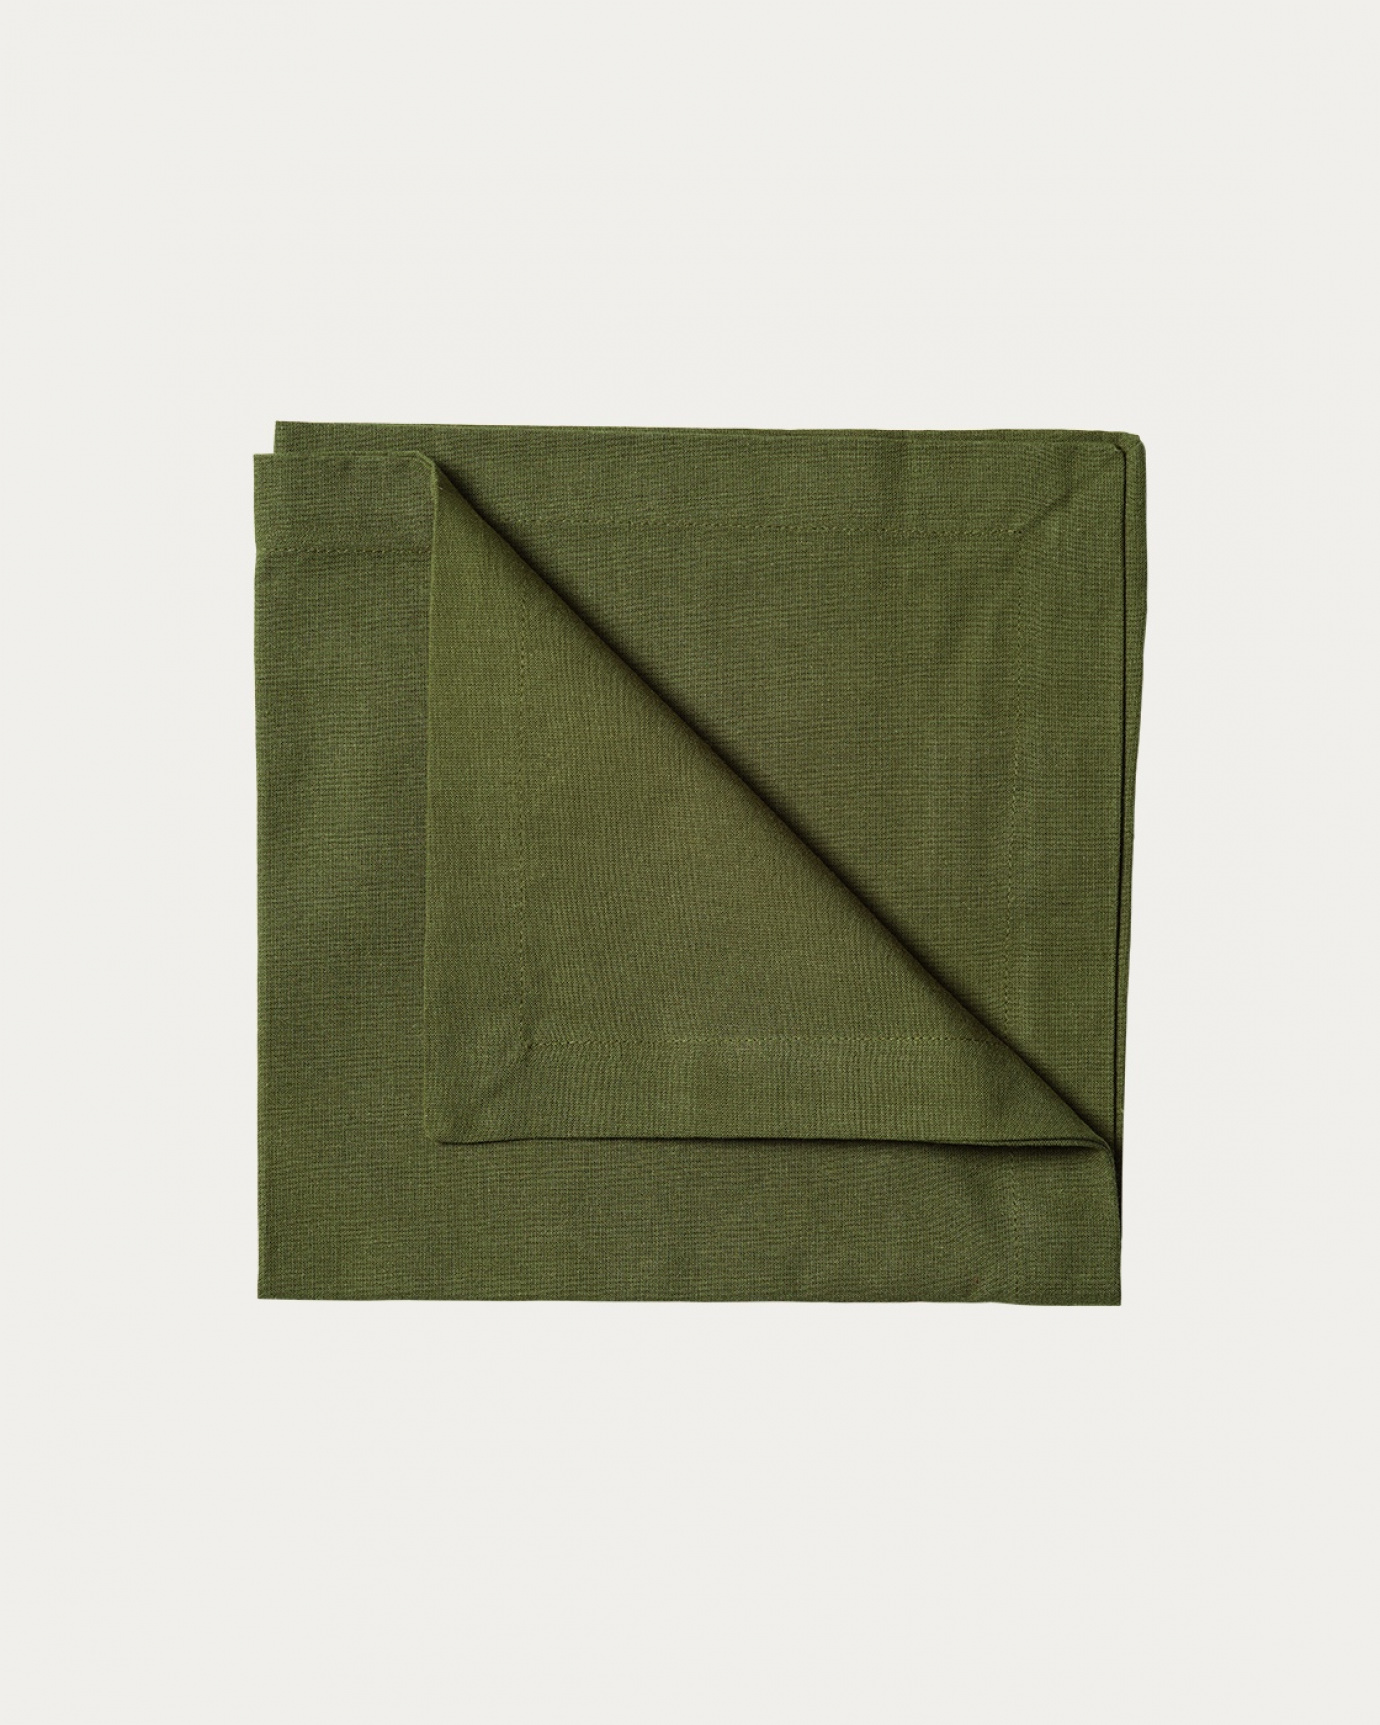 Product image dark olive green ROBERT napkin made of soft cotton from LINUM DESIGN. Size 45x45 cm and sold in 4-pack.